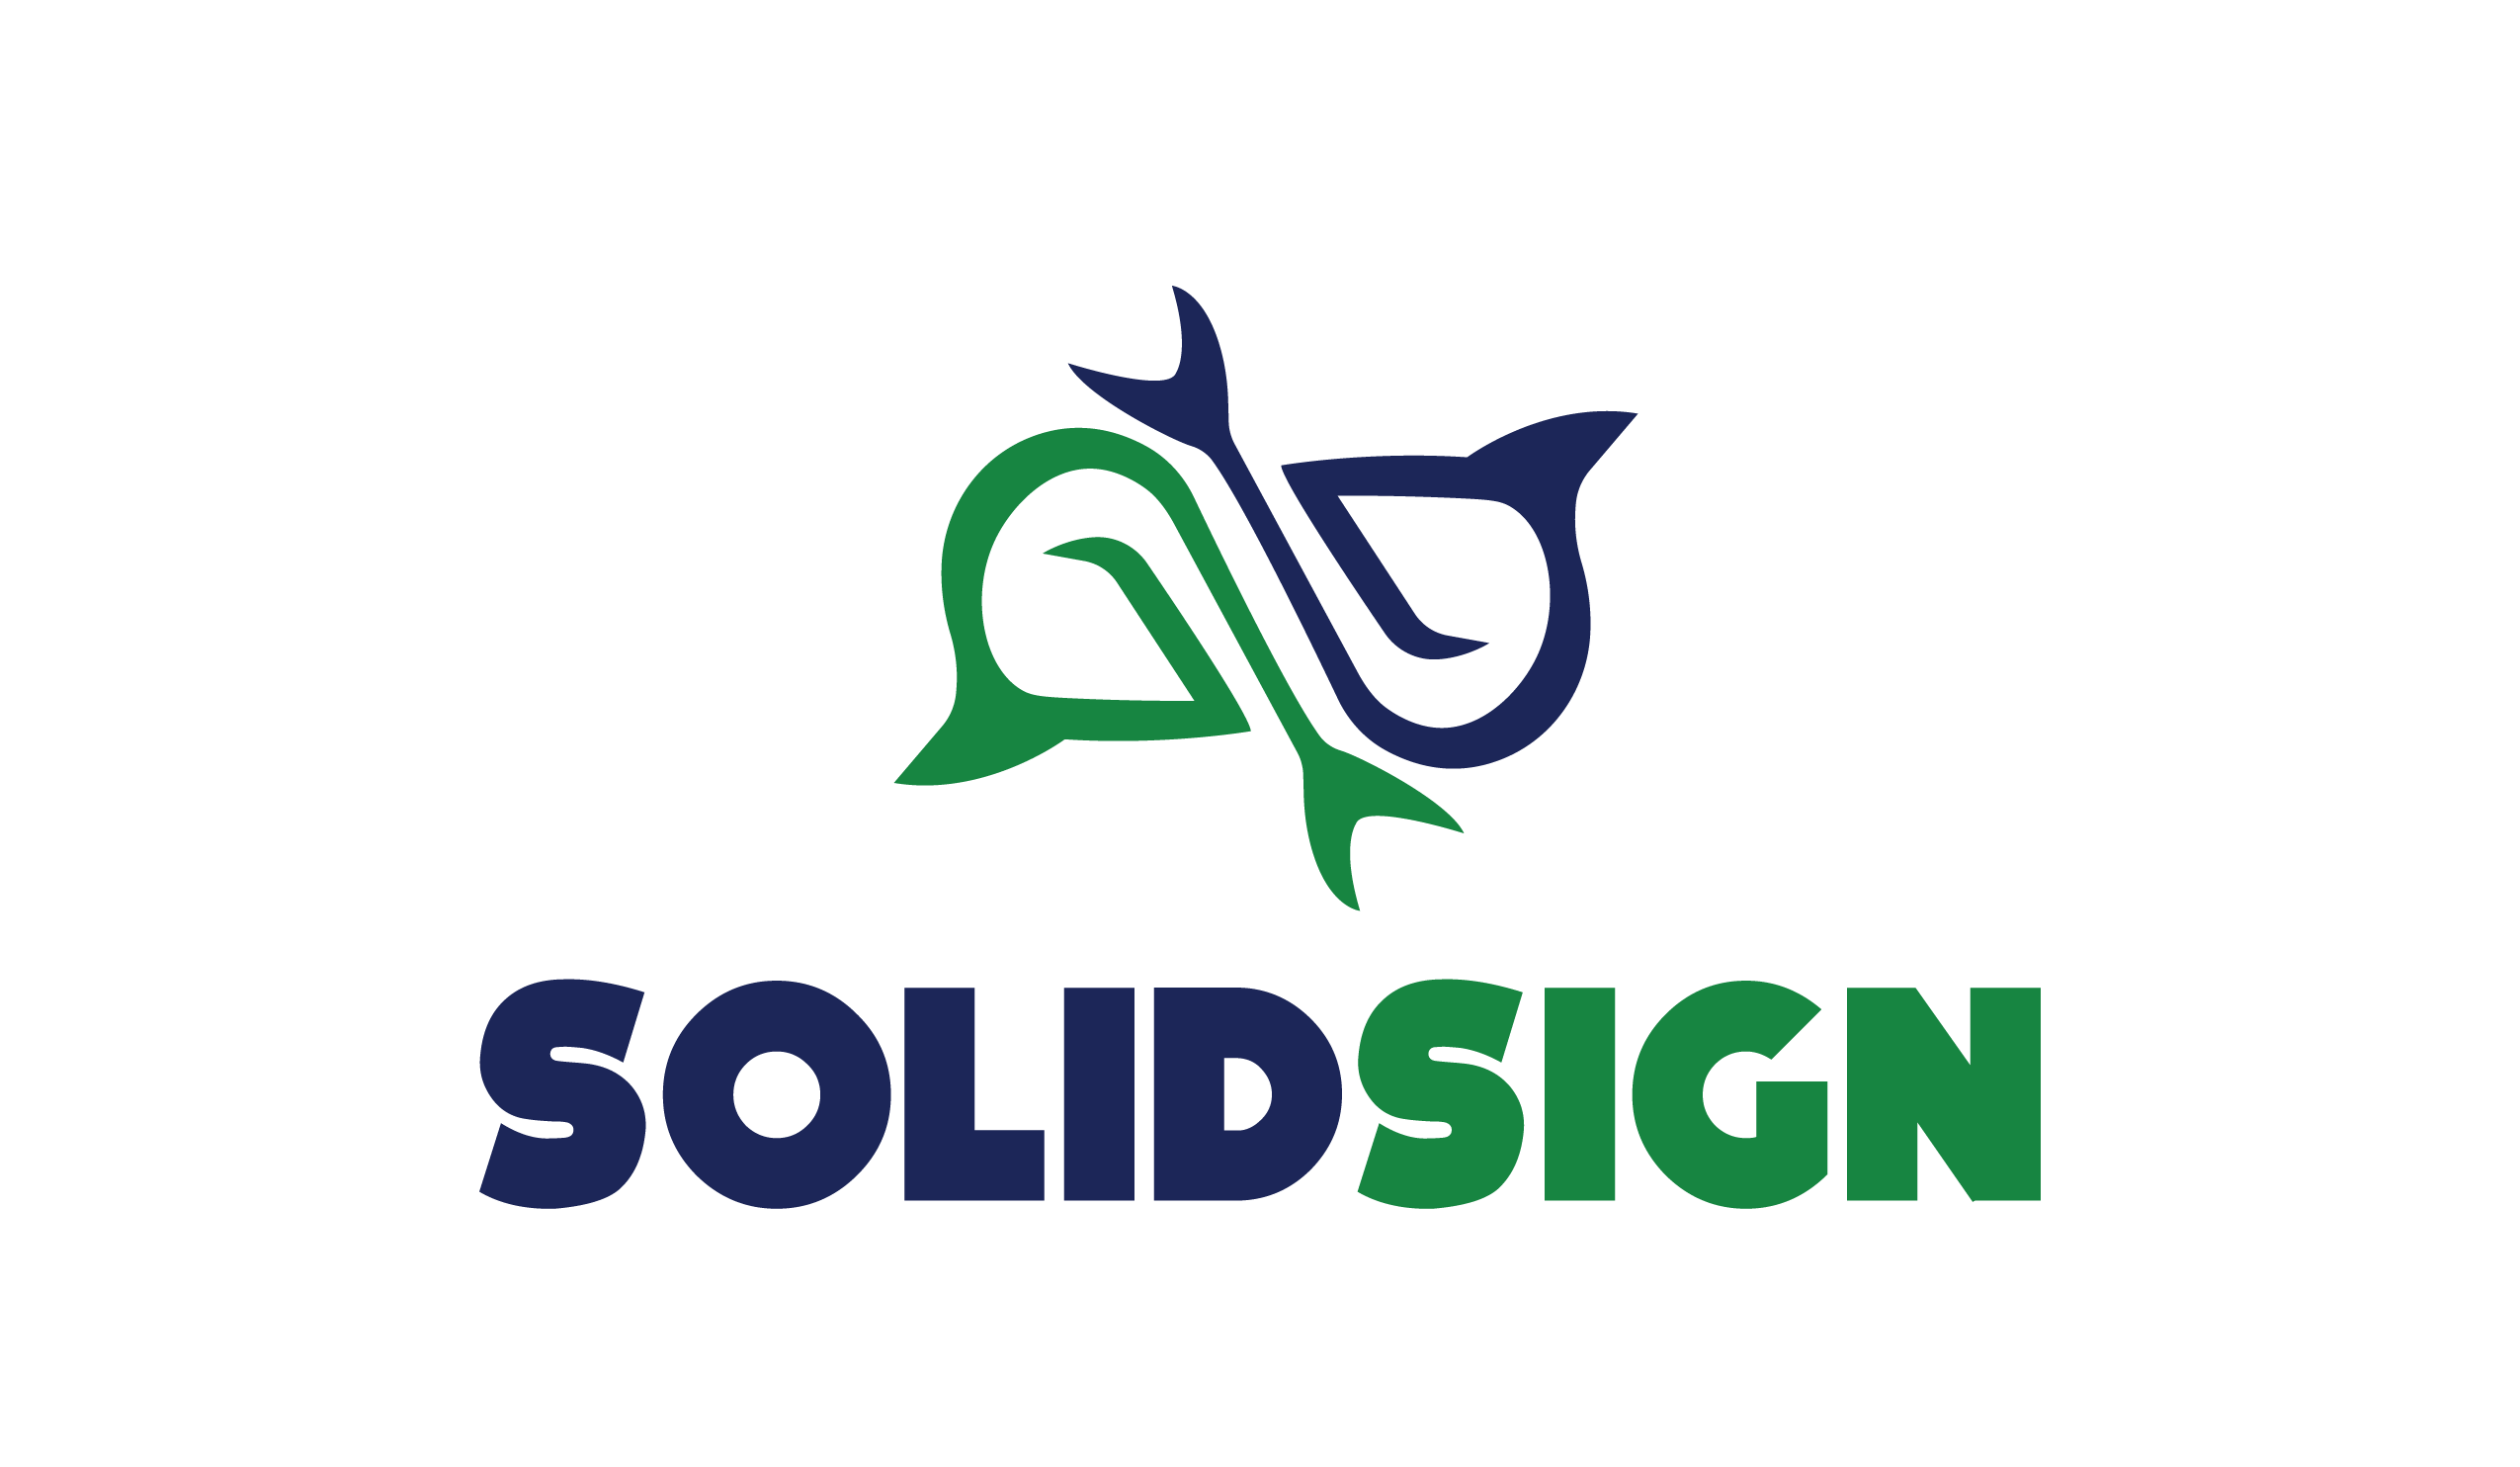 Vehicle Wrap - Solidsign